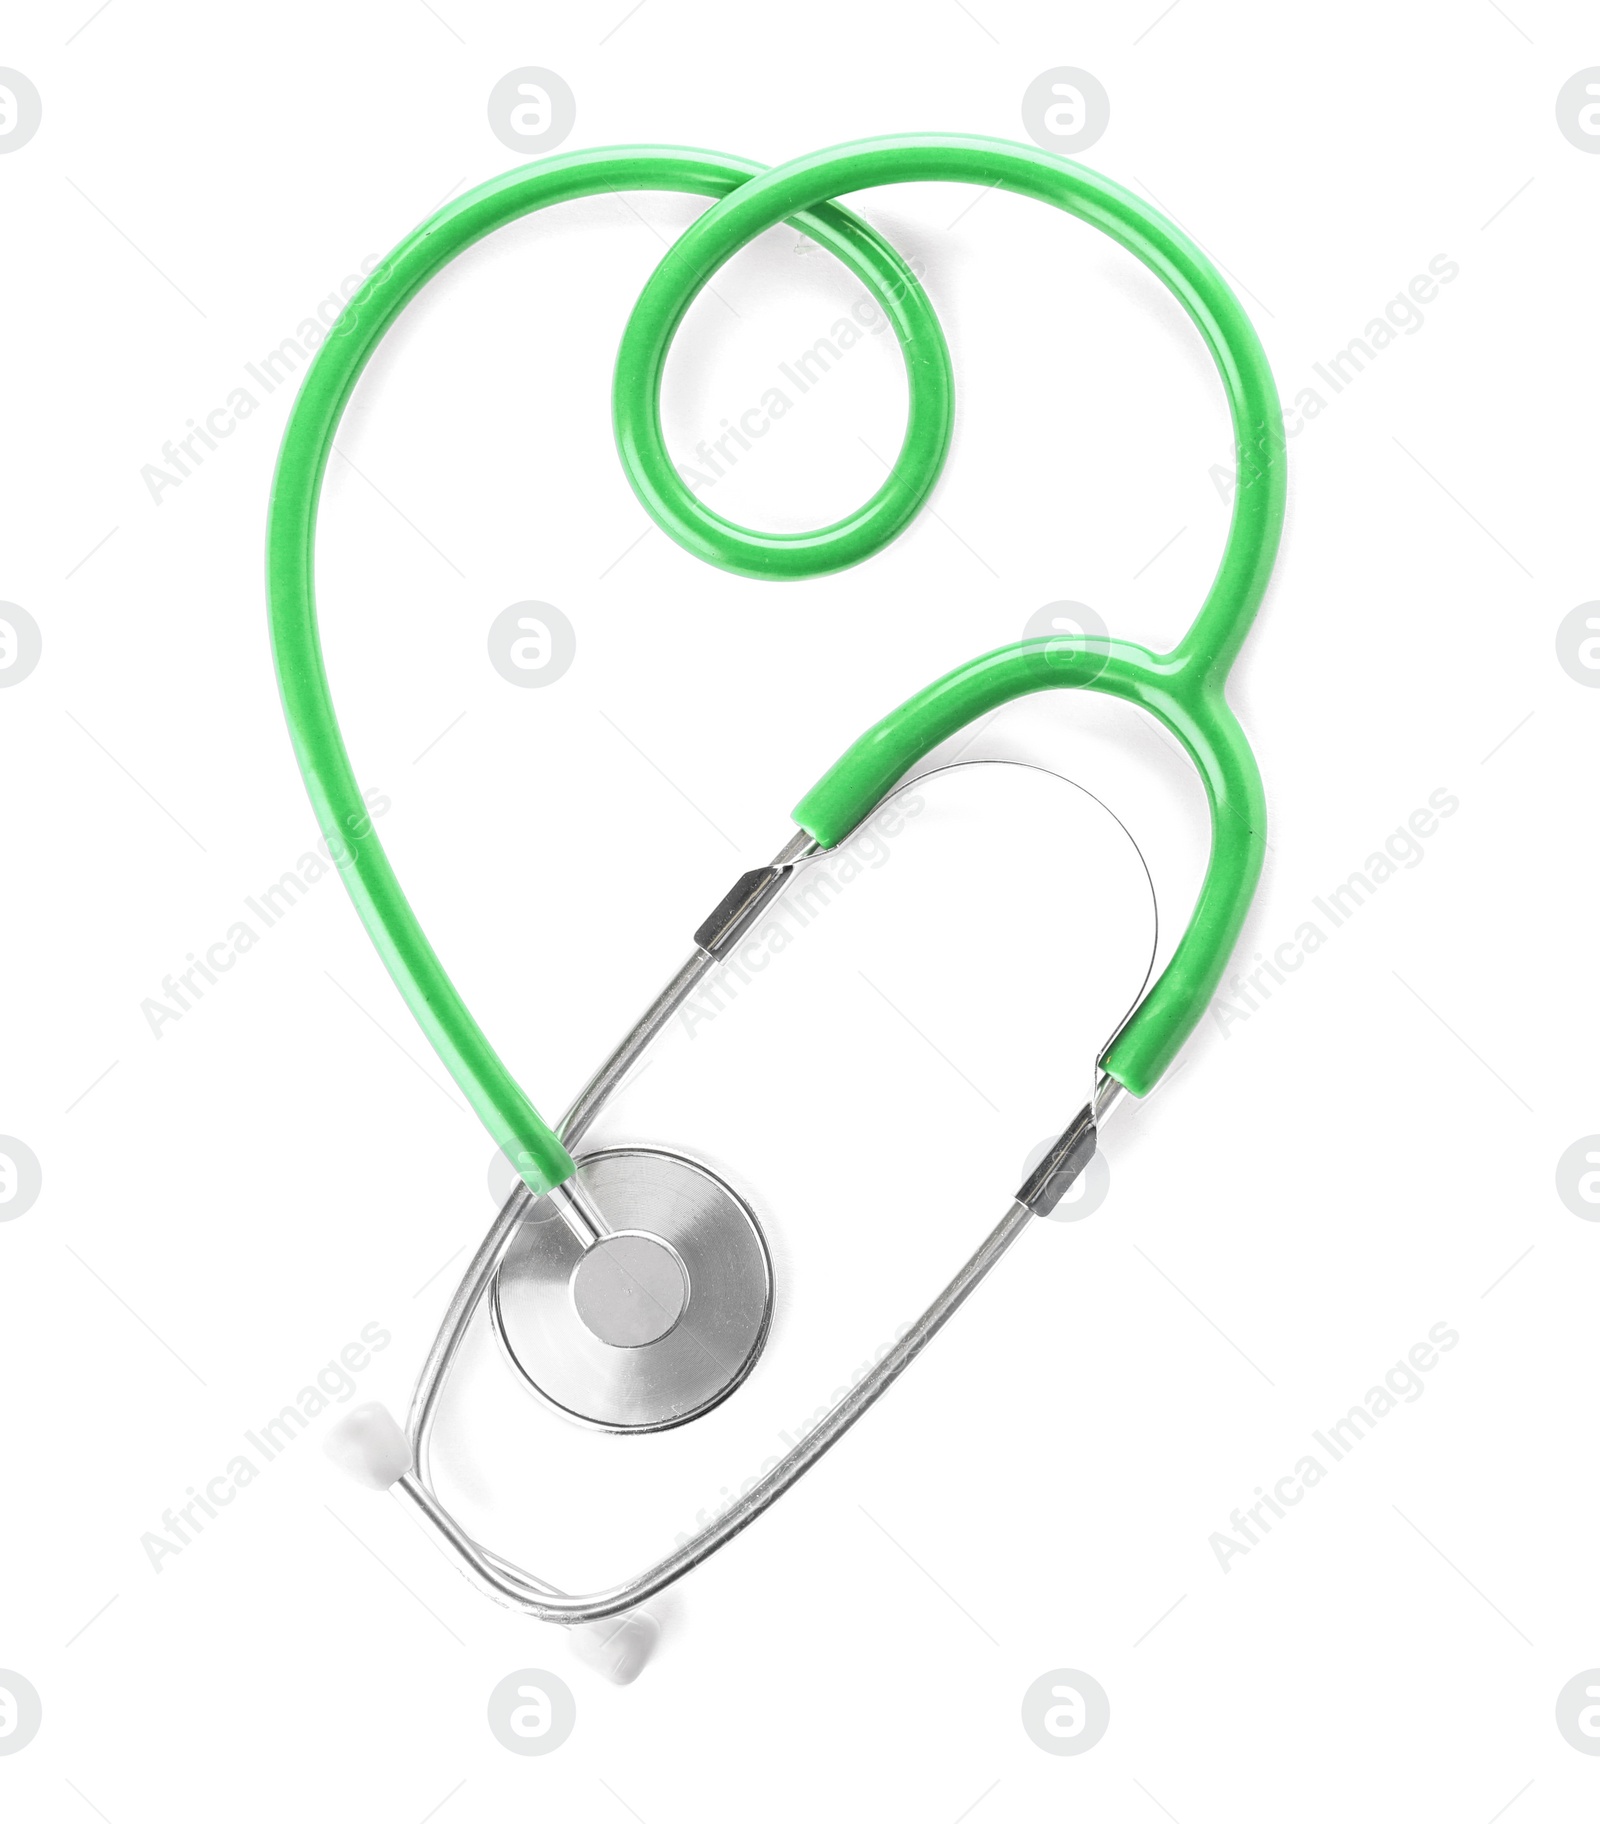 Photo of Stethoscope folded in shape of heart on white background, top view